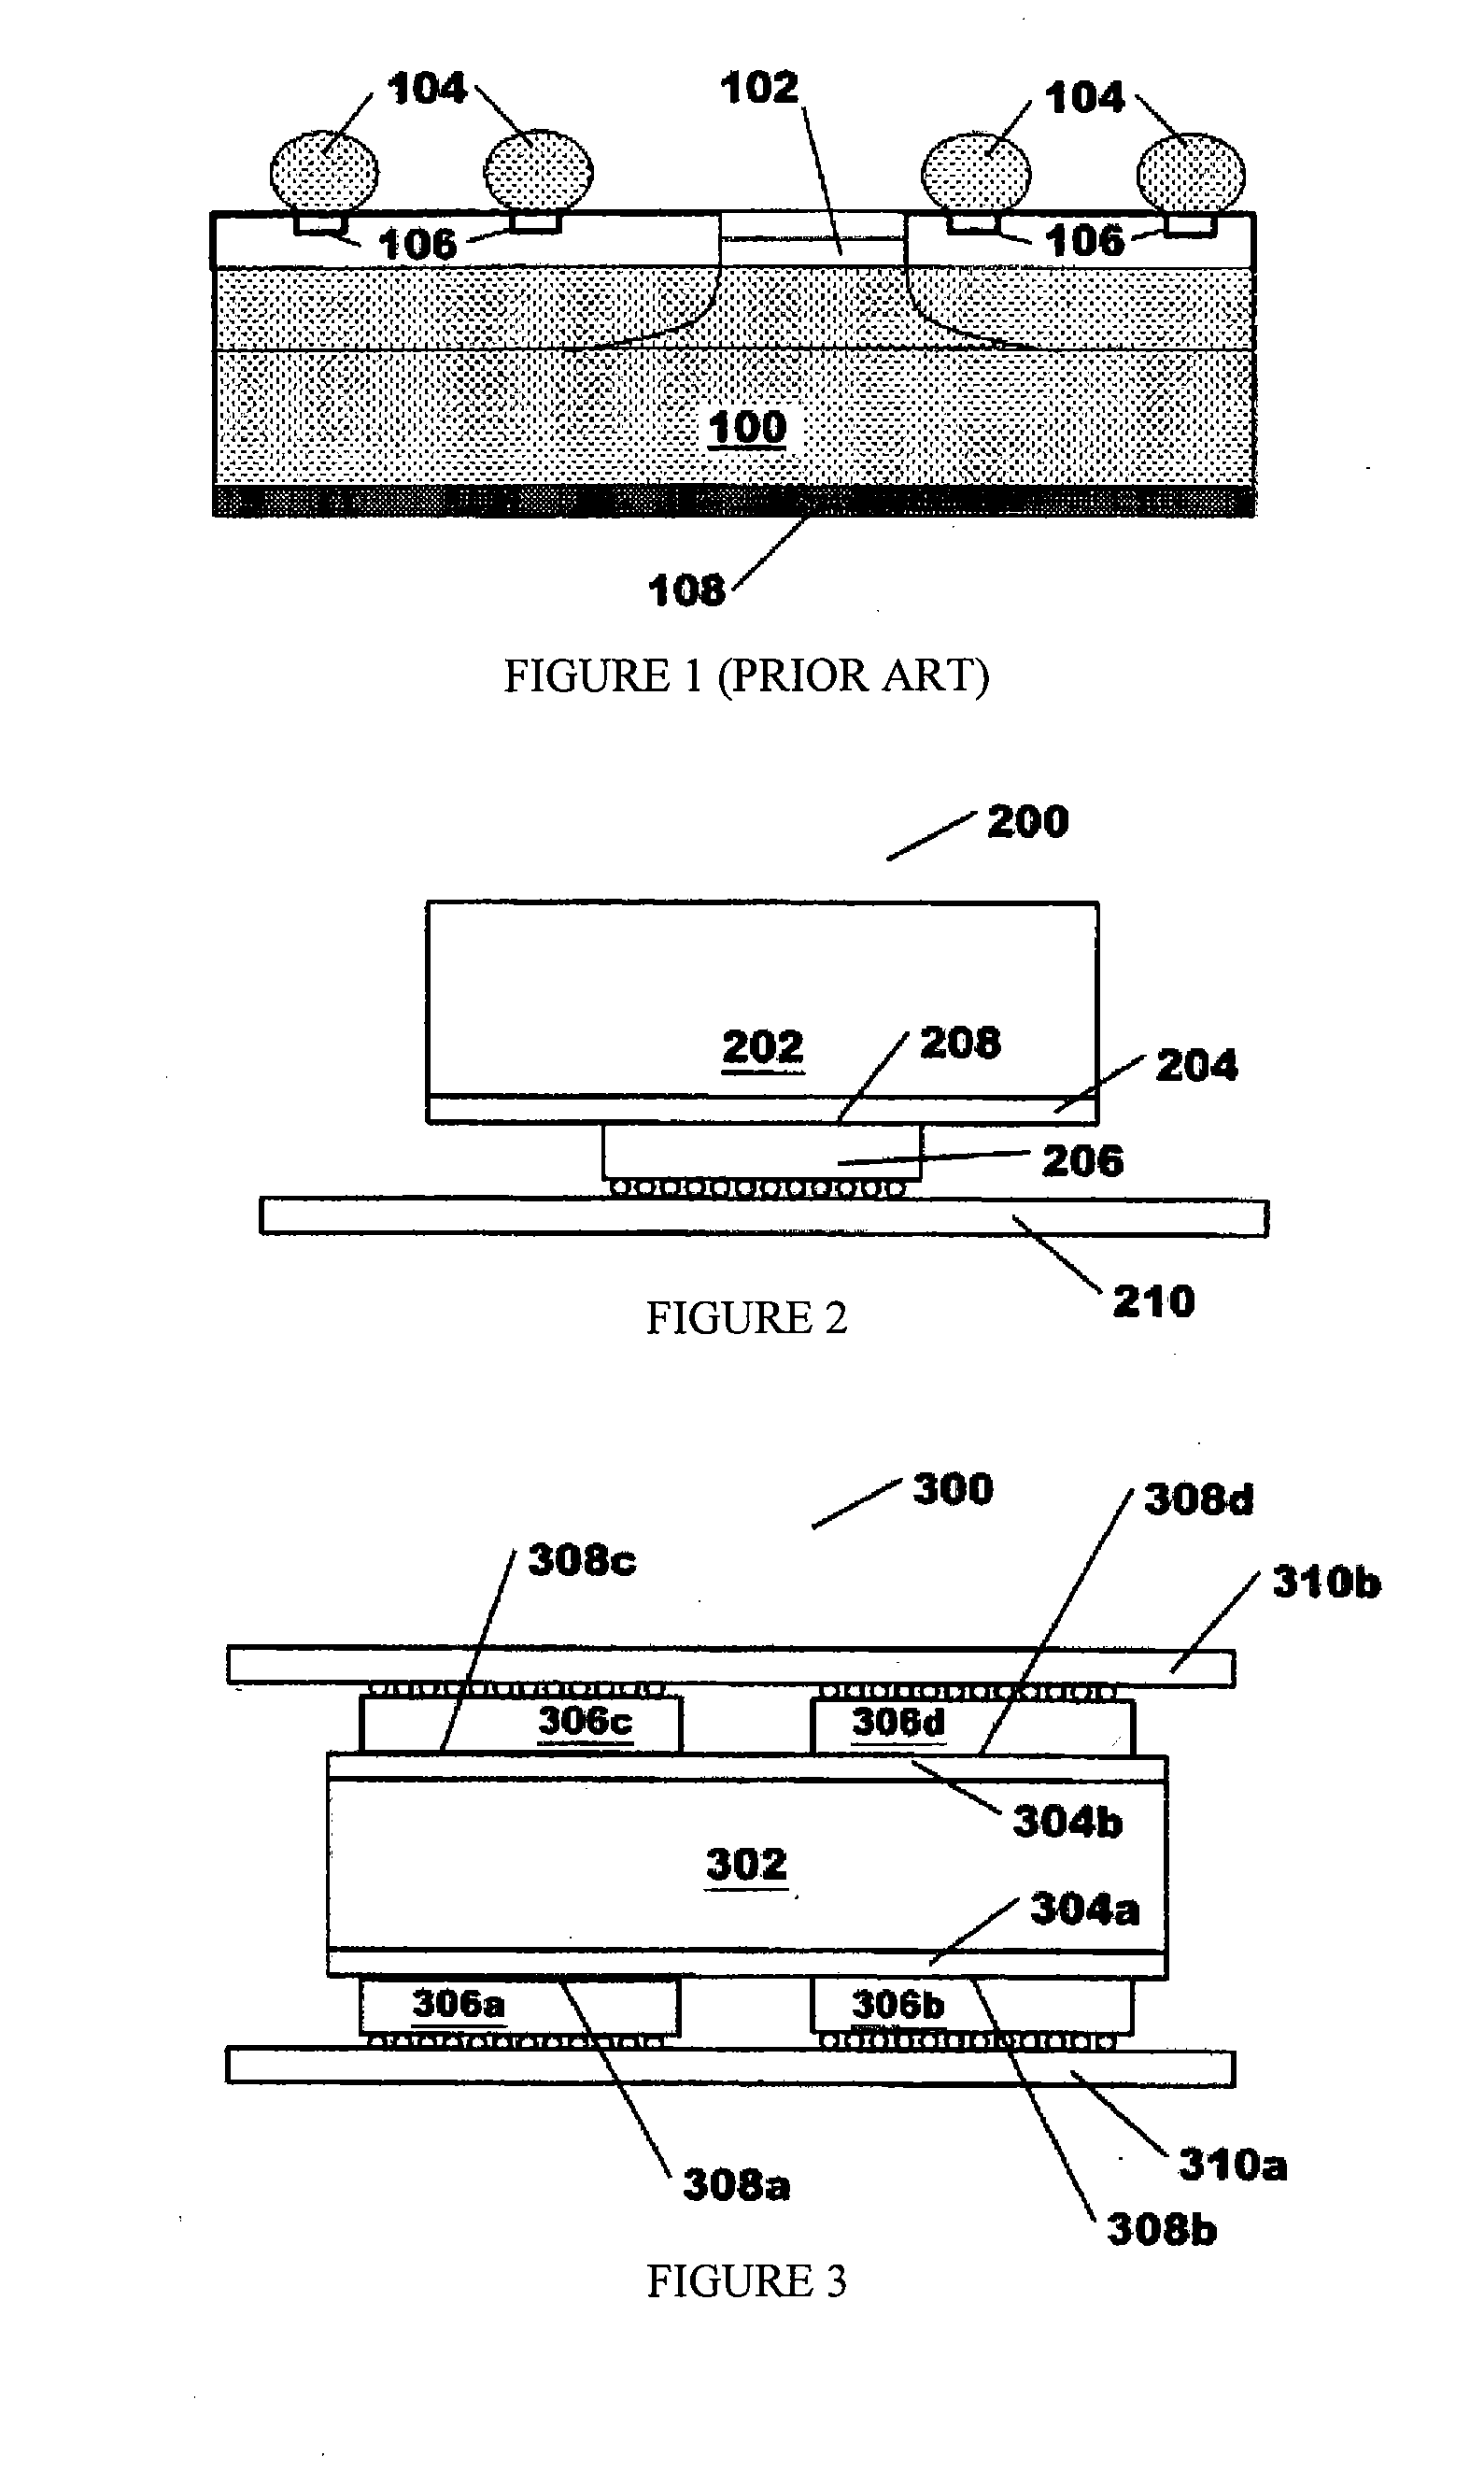 Integrated Circuit Micro-Cooler Having Tubes of a CNT Array in Essentially the Same Height over a Surface